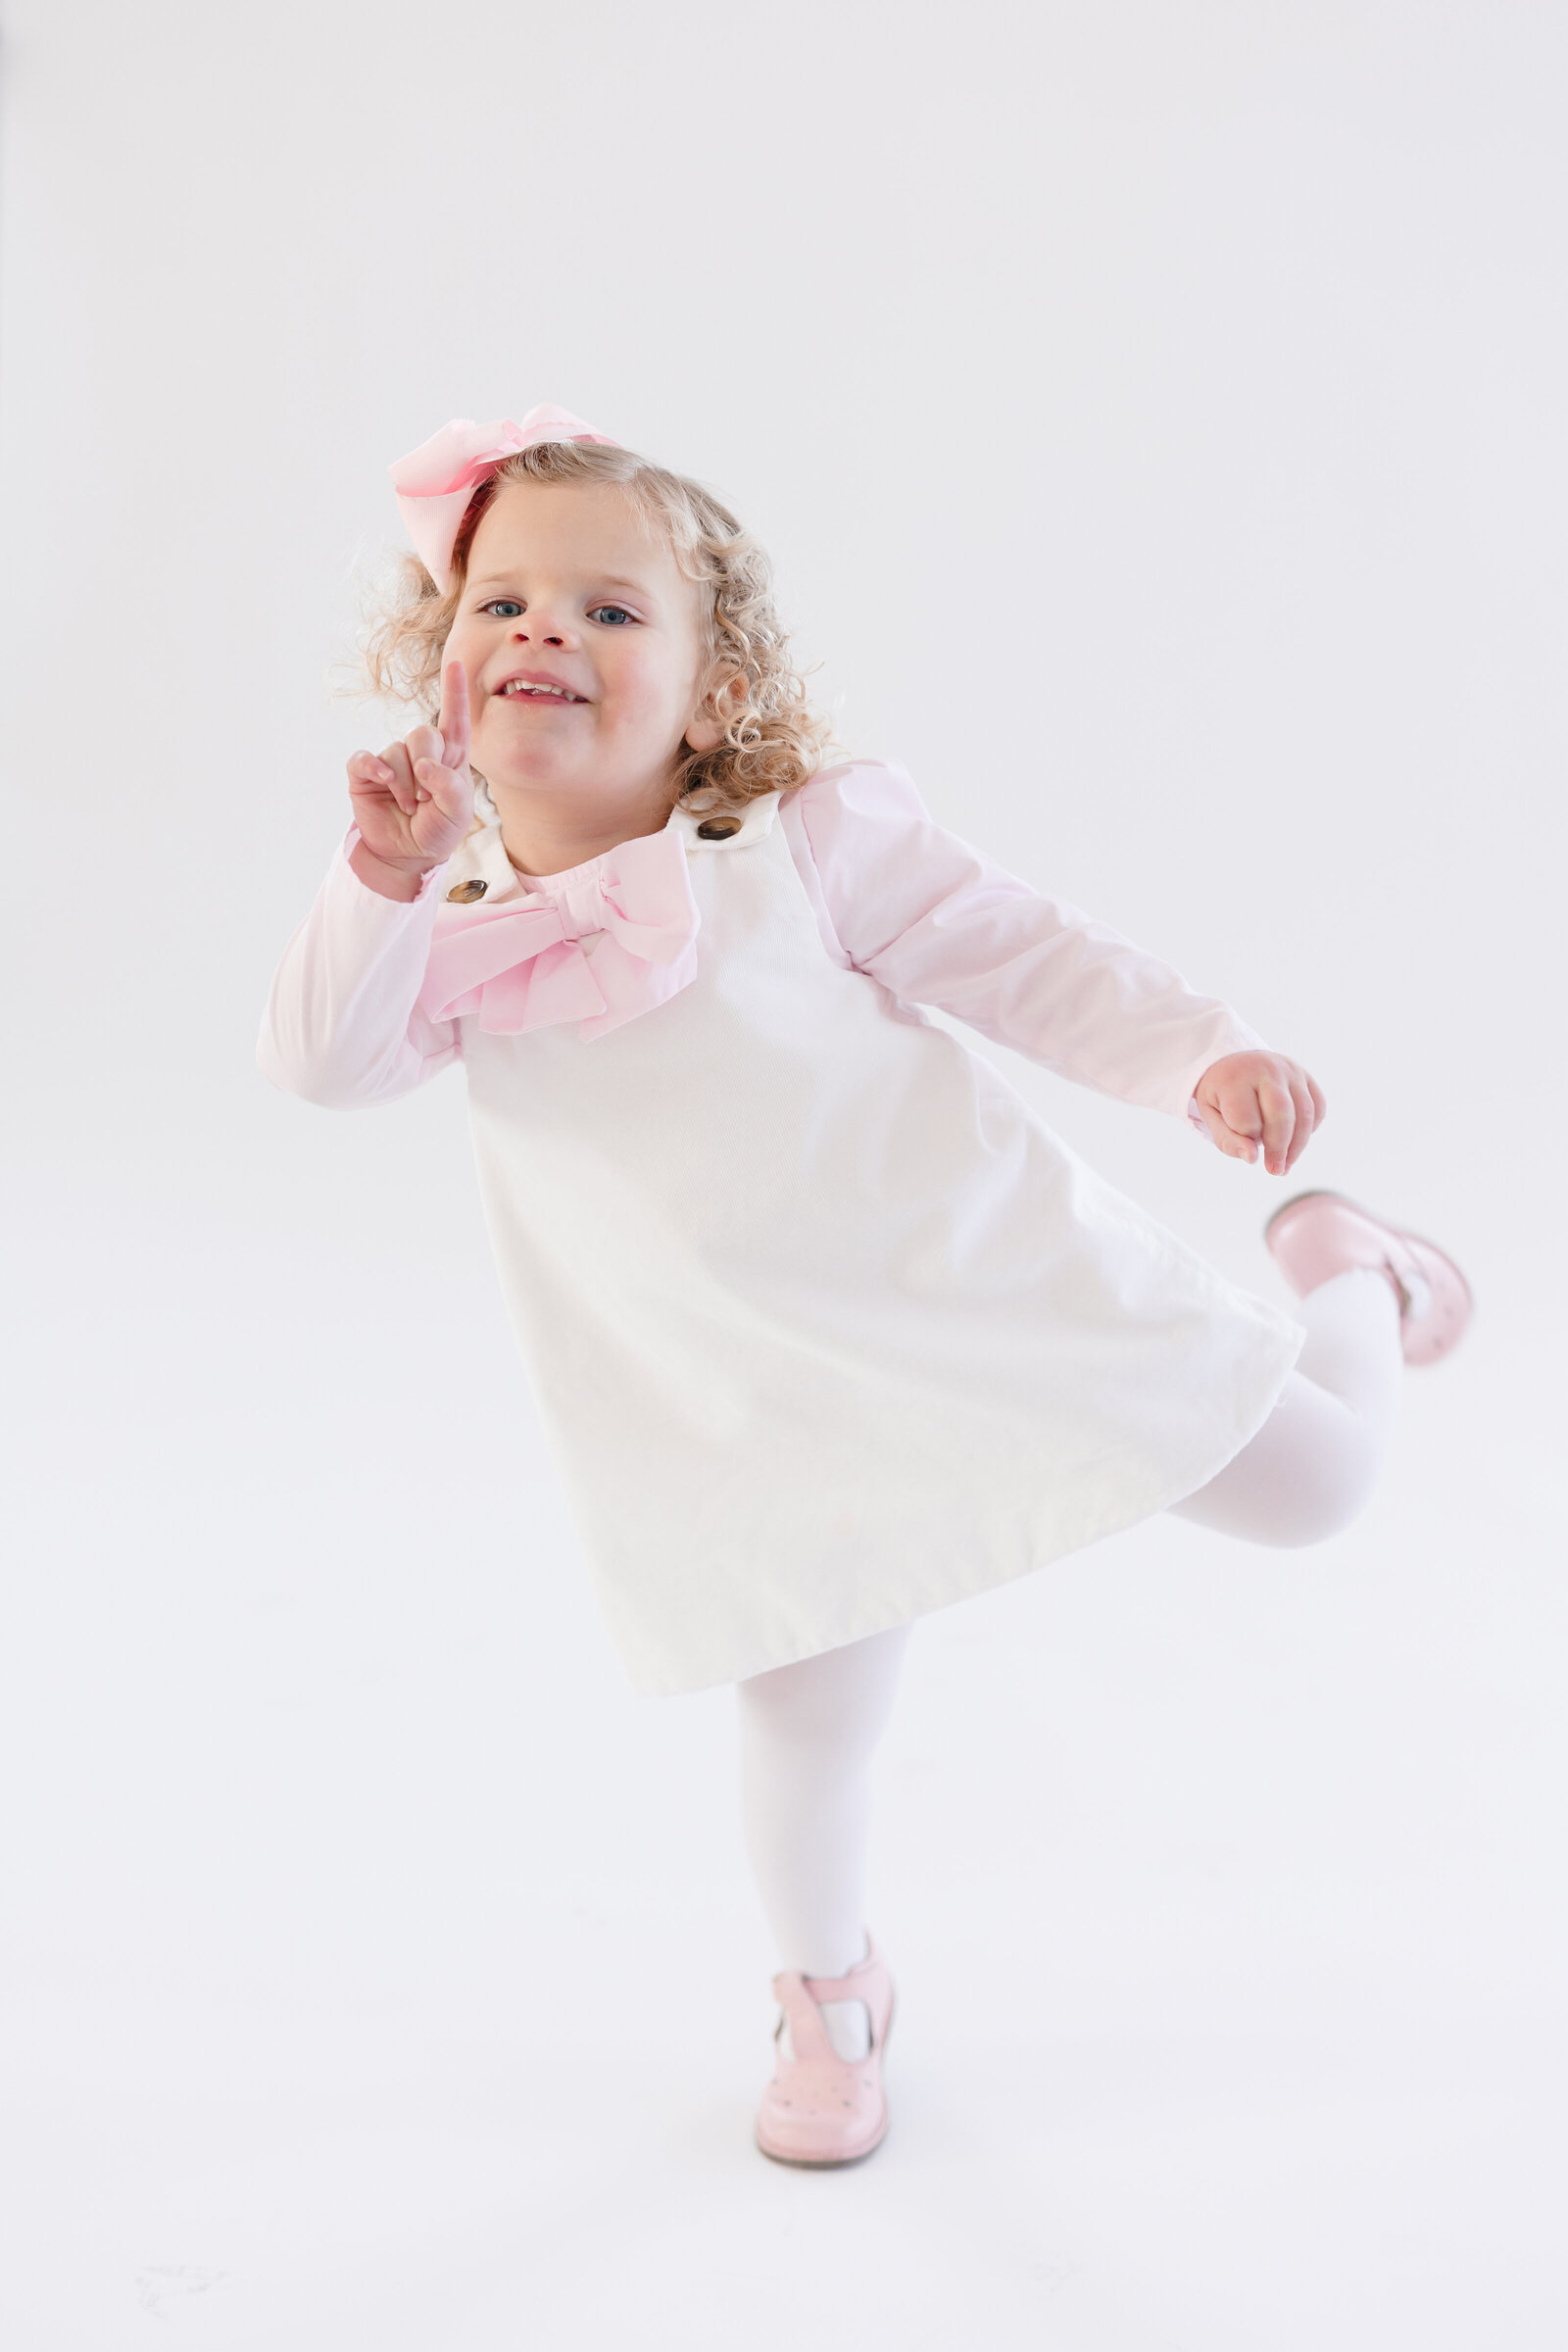 Little girl wearing a white and pink dress as she twirls and makes a silly face